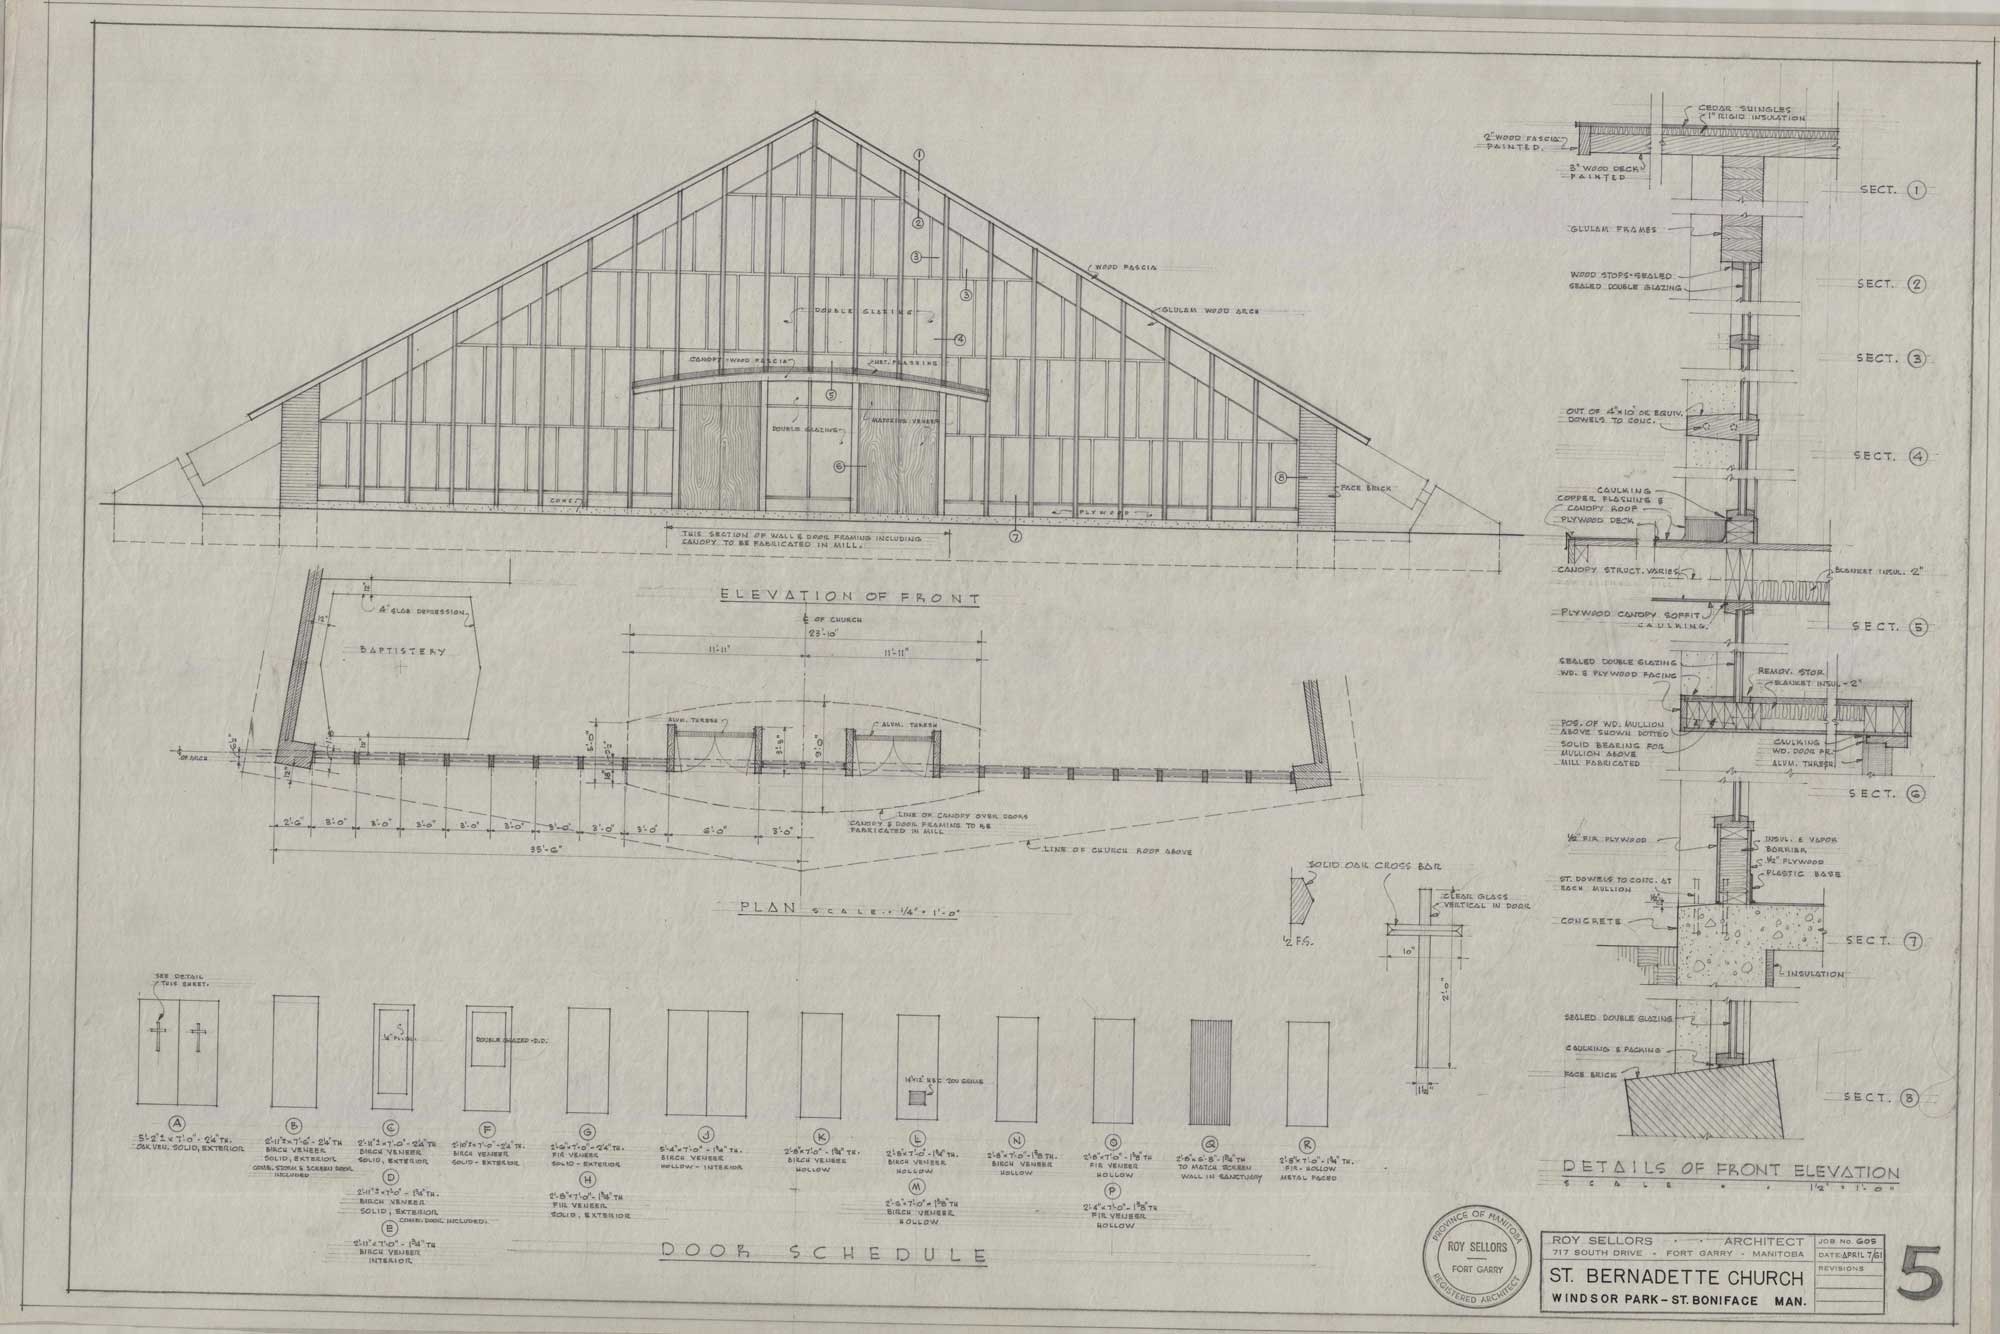 Image shows the drawing of the front elevation for St. Bernadette Church.